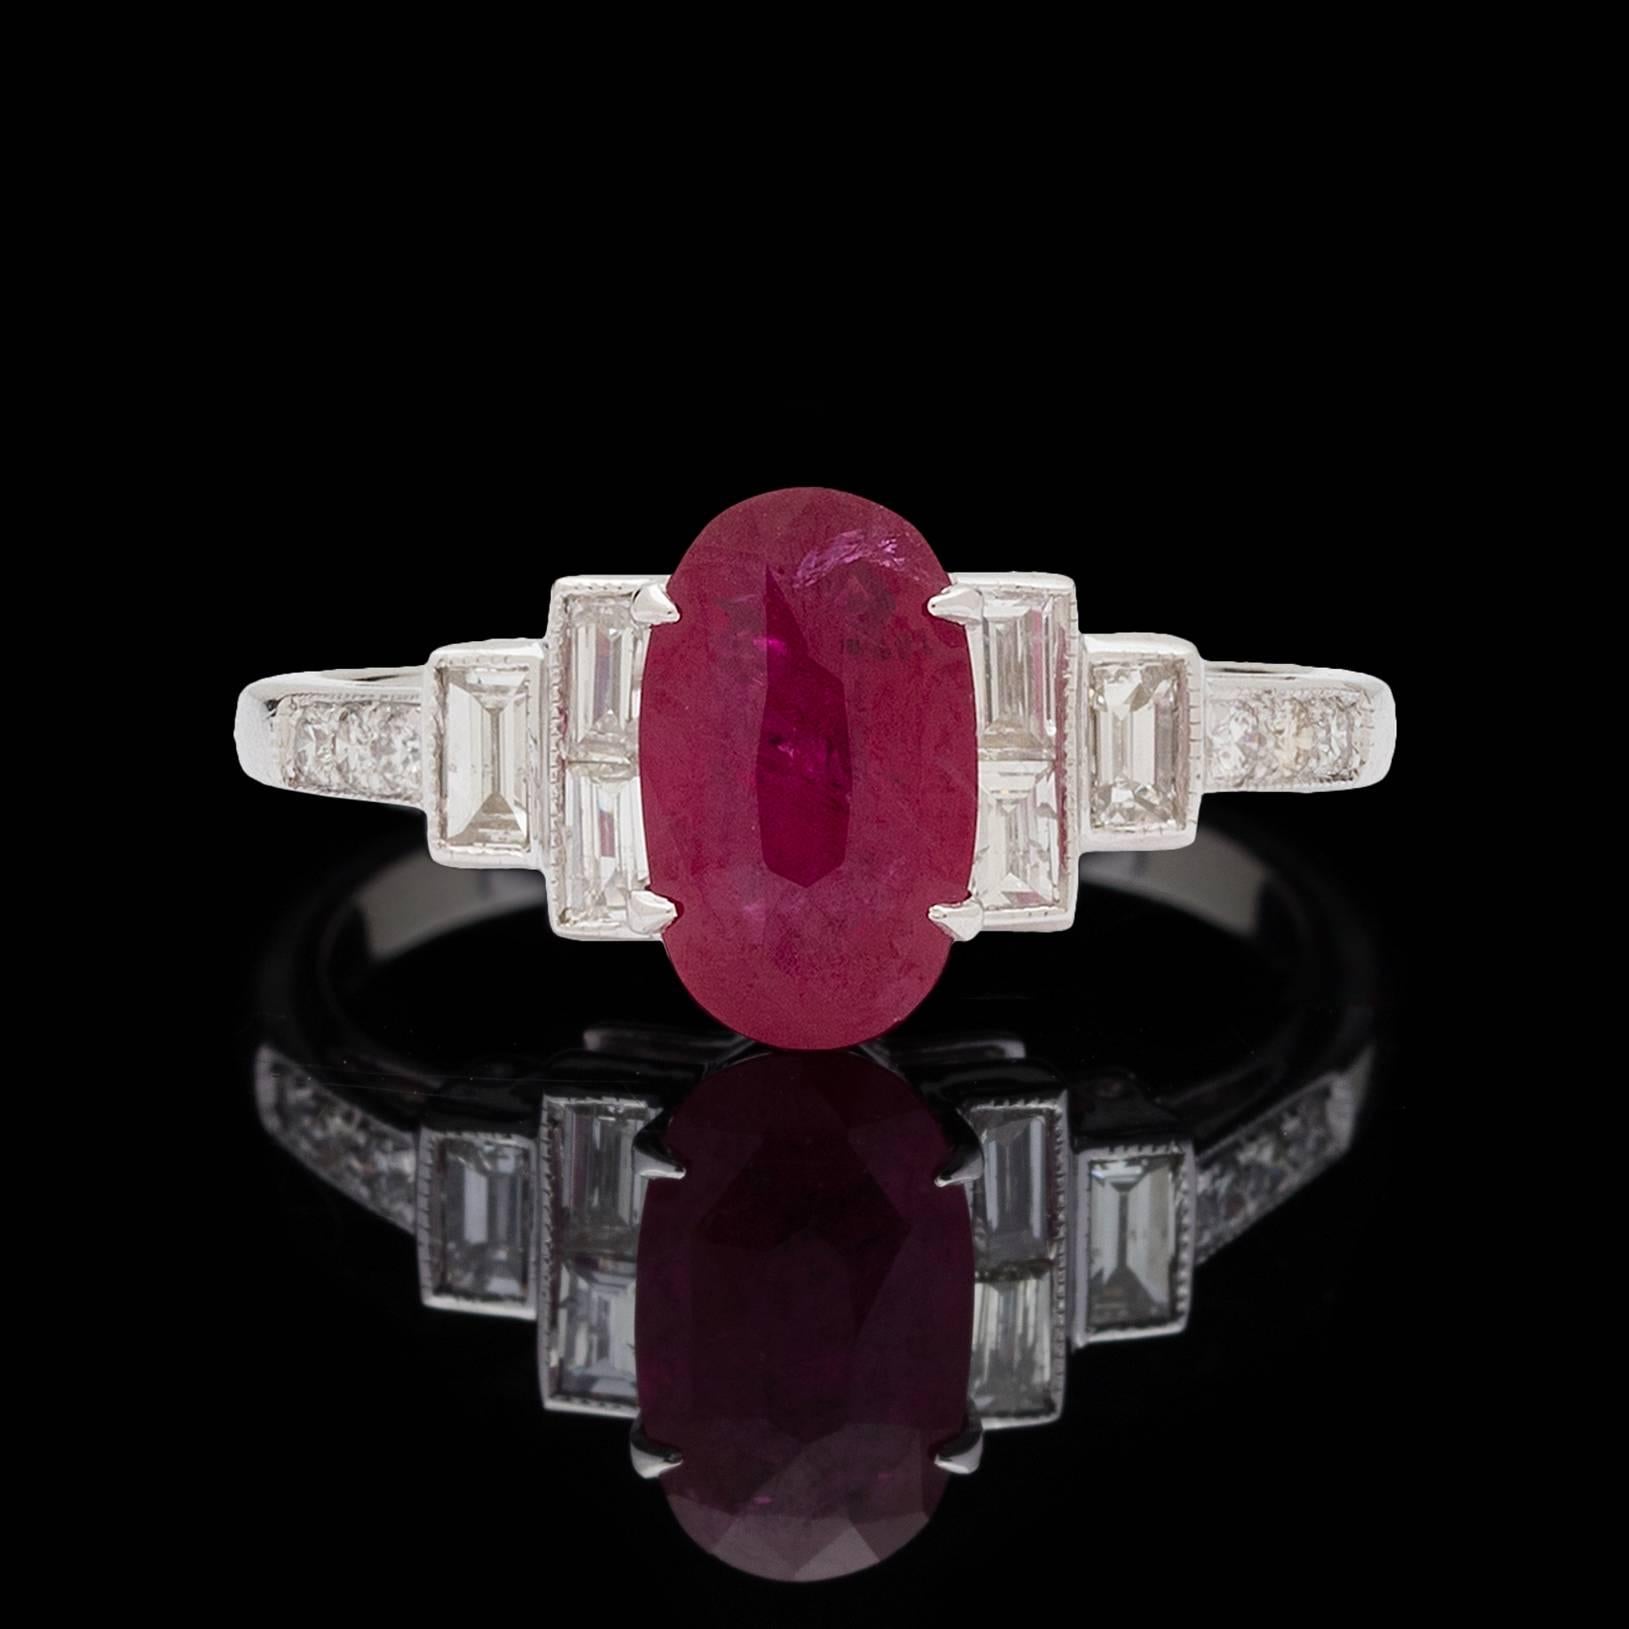 Stunning Deco style 18k white gold ring features a 1.97 carat Burmese pink sapphire detailed with baguette and round brilliant diamonds totaling 0.43 carats. Ring size is a 6.75 and can be resized. Total weight of the ring is 3.5 grams. 